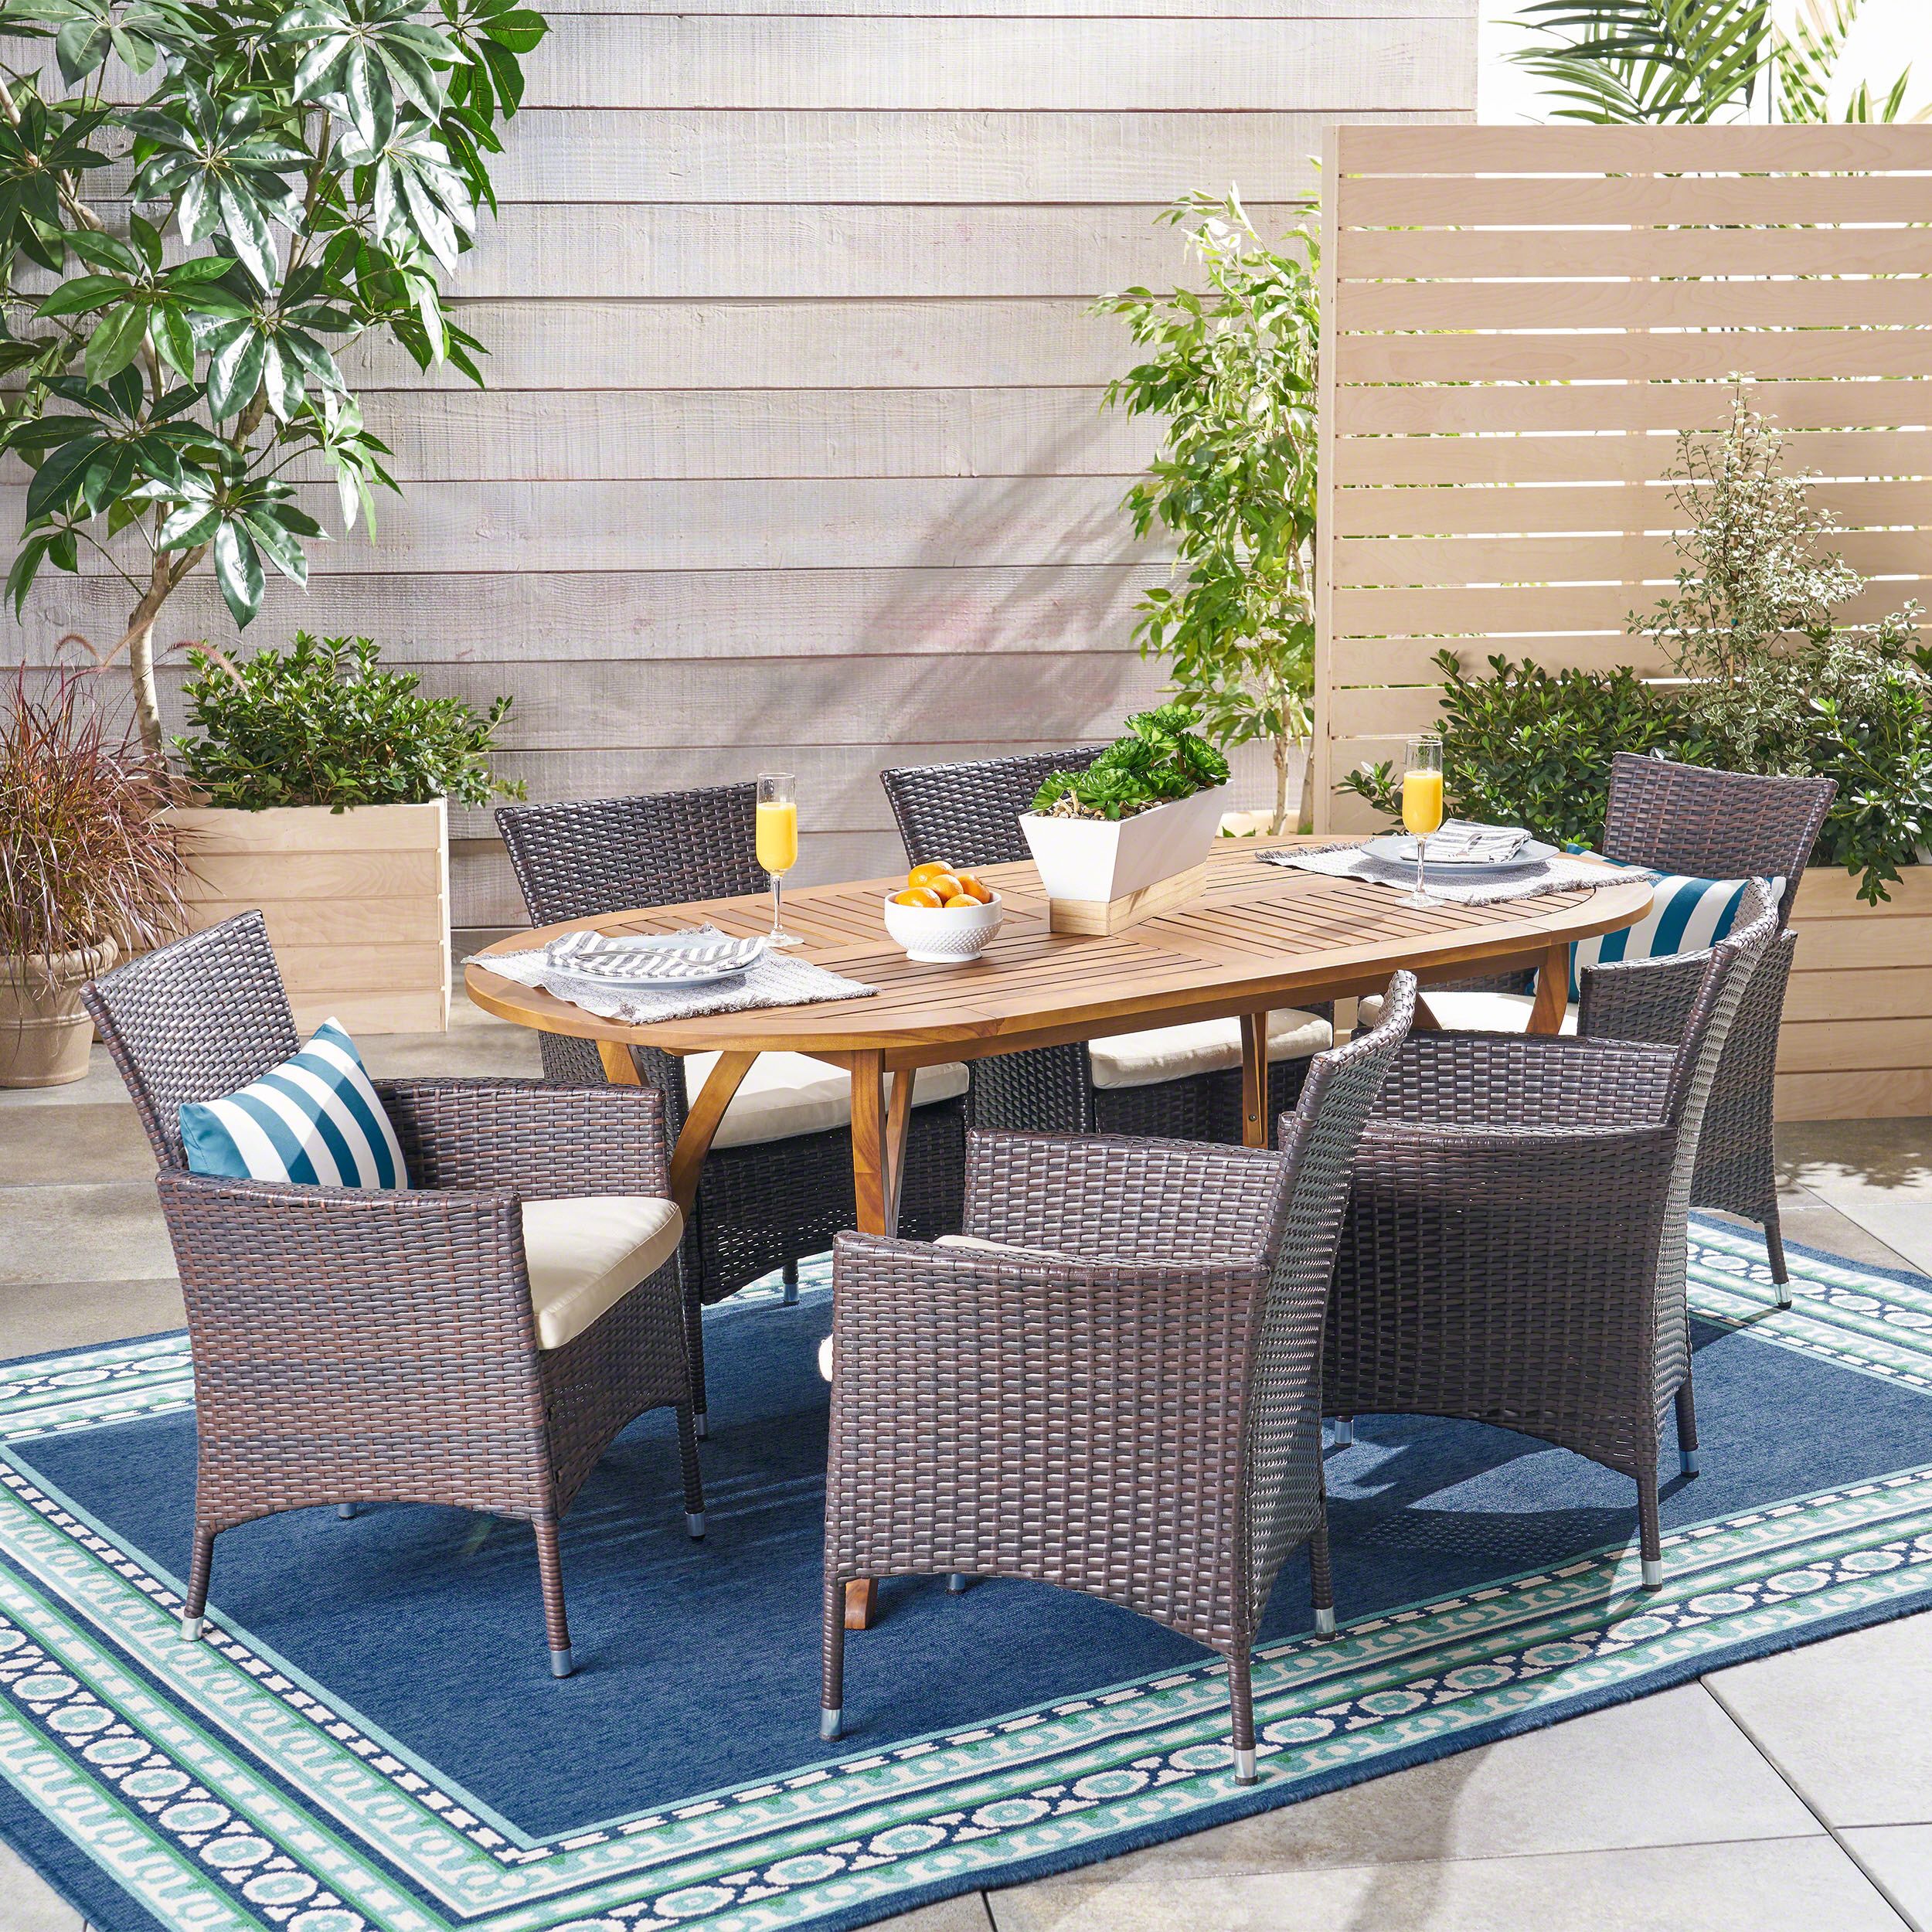 Edna Outdoor 7 Piece Acacia Wood And Wicker Dining Set, Teak With Multi Pertaining To Brown Acacia Patio Dining Sets (View 8 of 15)